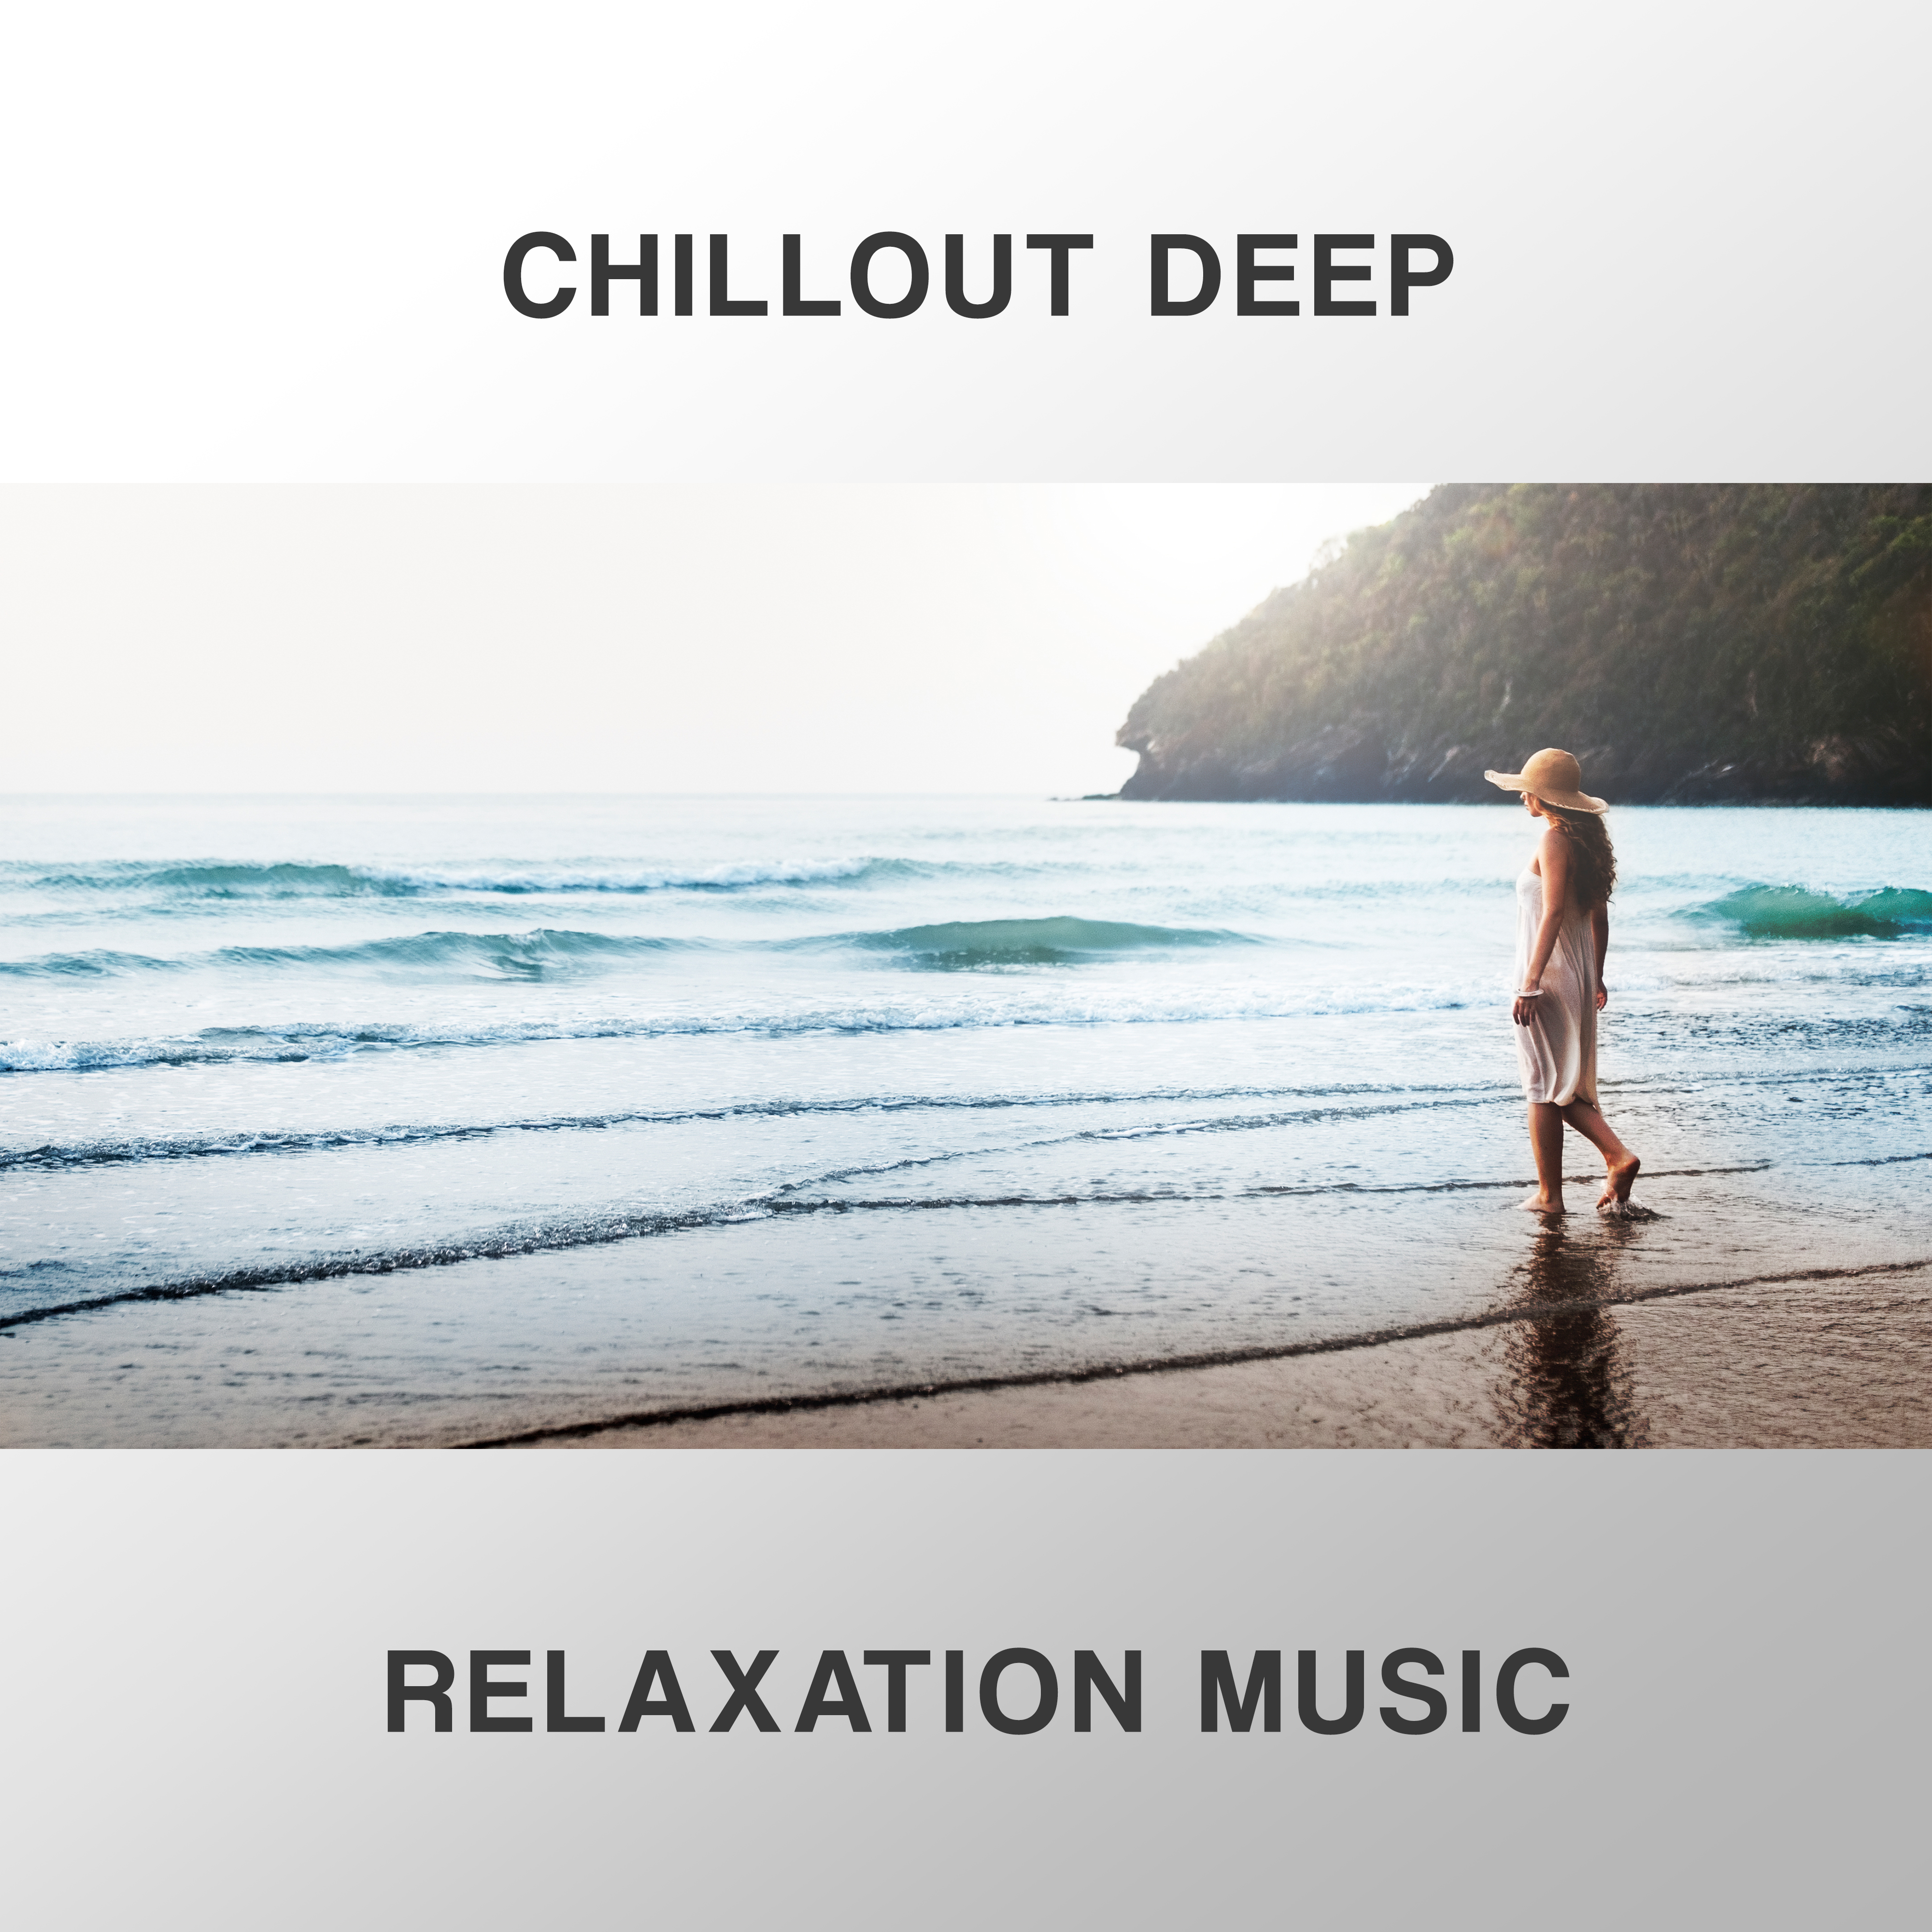 Chillout Deep Relaxation Music